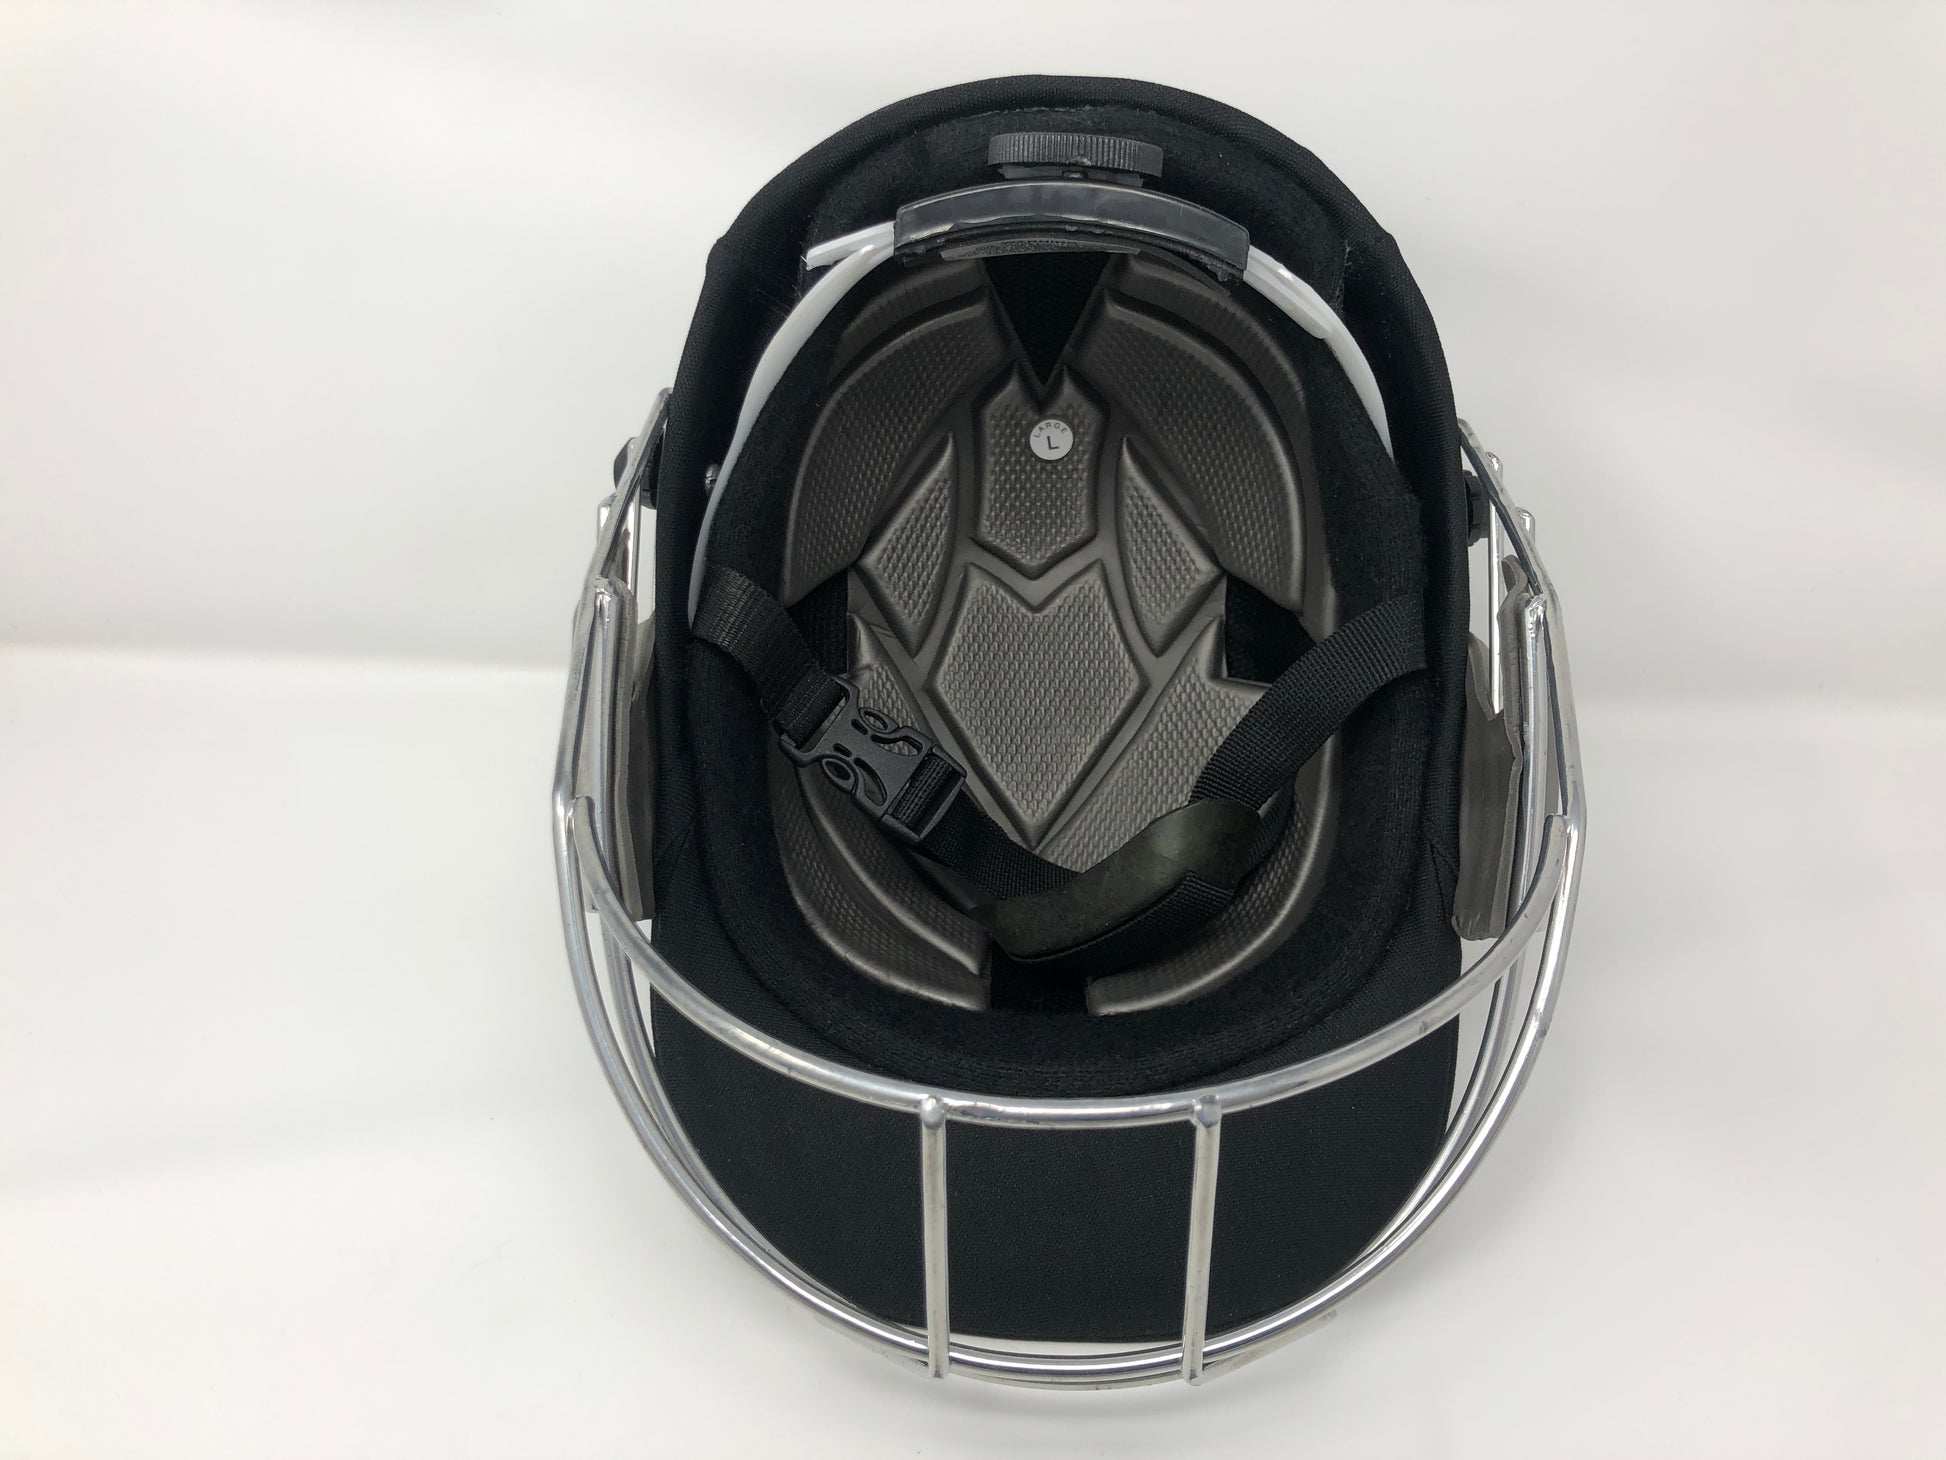 Black Ash custom adjustable helmet with a high impact polypropylene shell and chrome finish steel grill, offering 8 micro adjustments for optimal protection and visibility, impact-resistant padding, adjustable to fit 52-58 cm, with nape dial adjuster and soft ear protection.